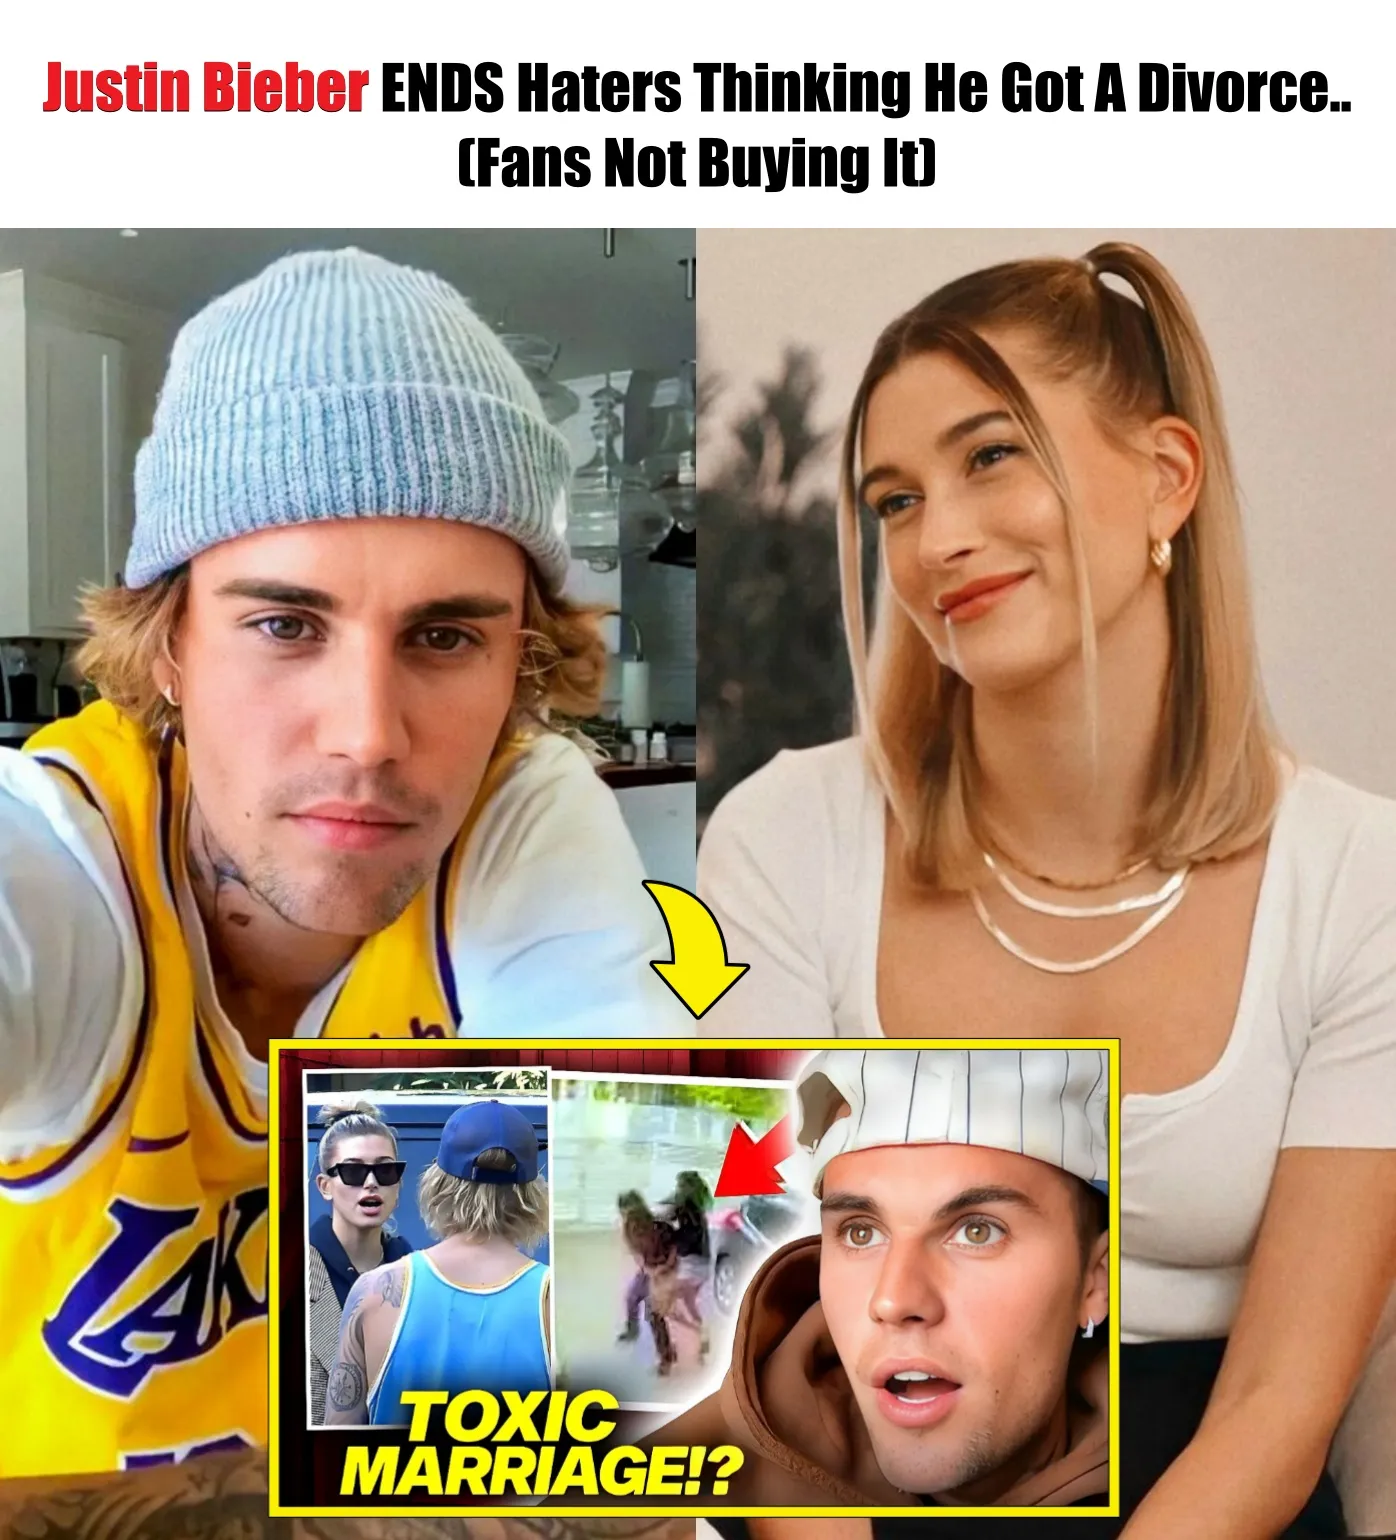 Cover Image for Justin Bieber ENDS Haters Thinking He Got A Divorce.. (Fans Not Buying It)